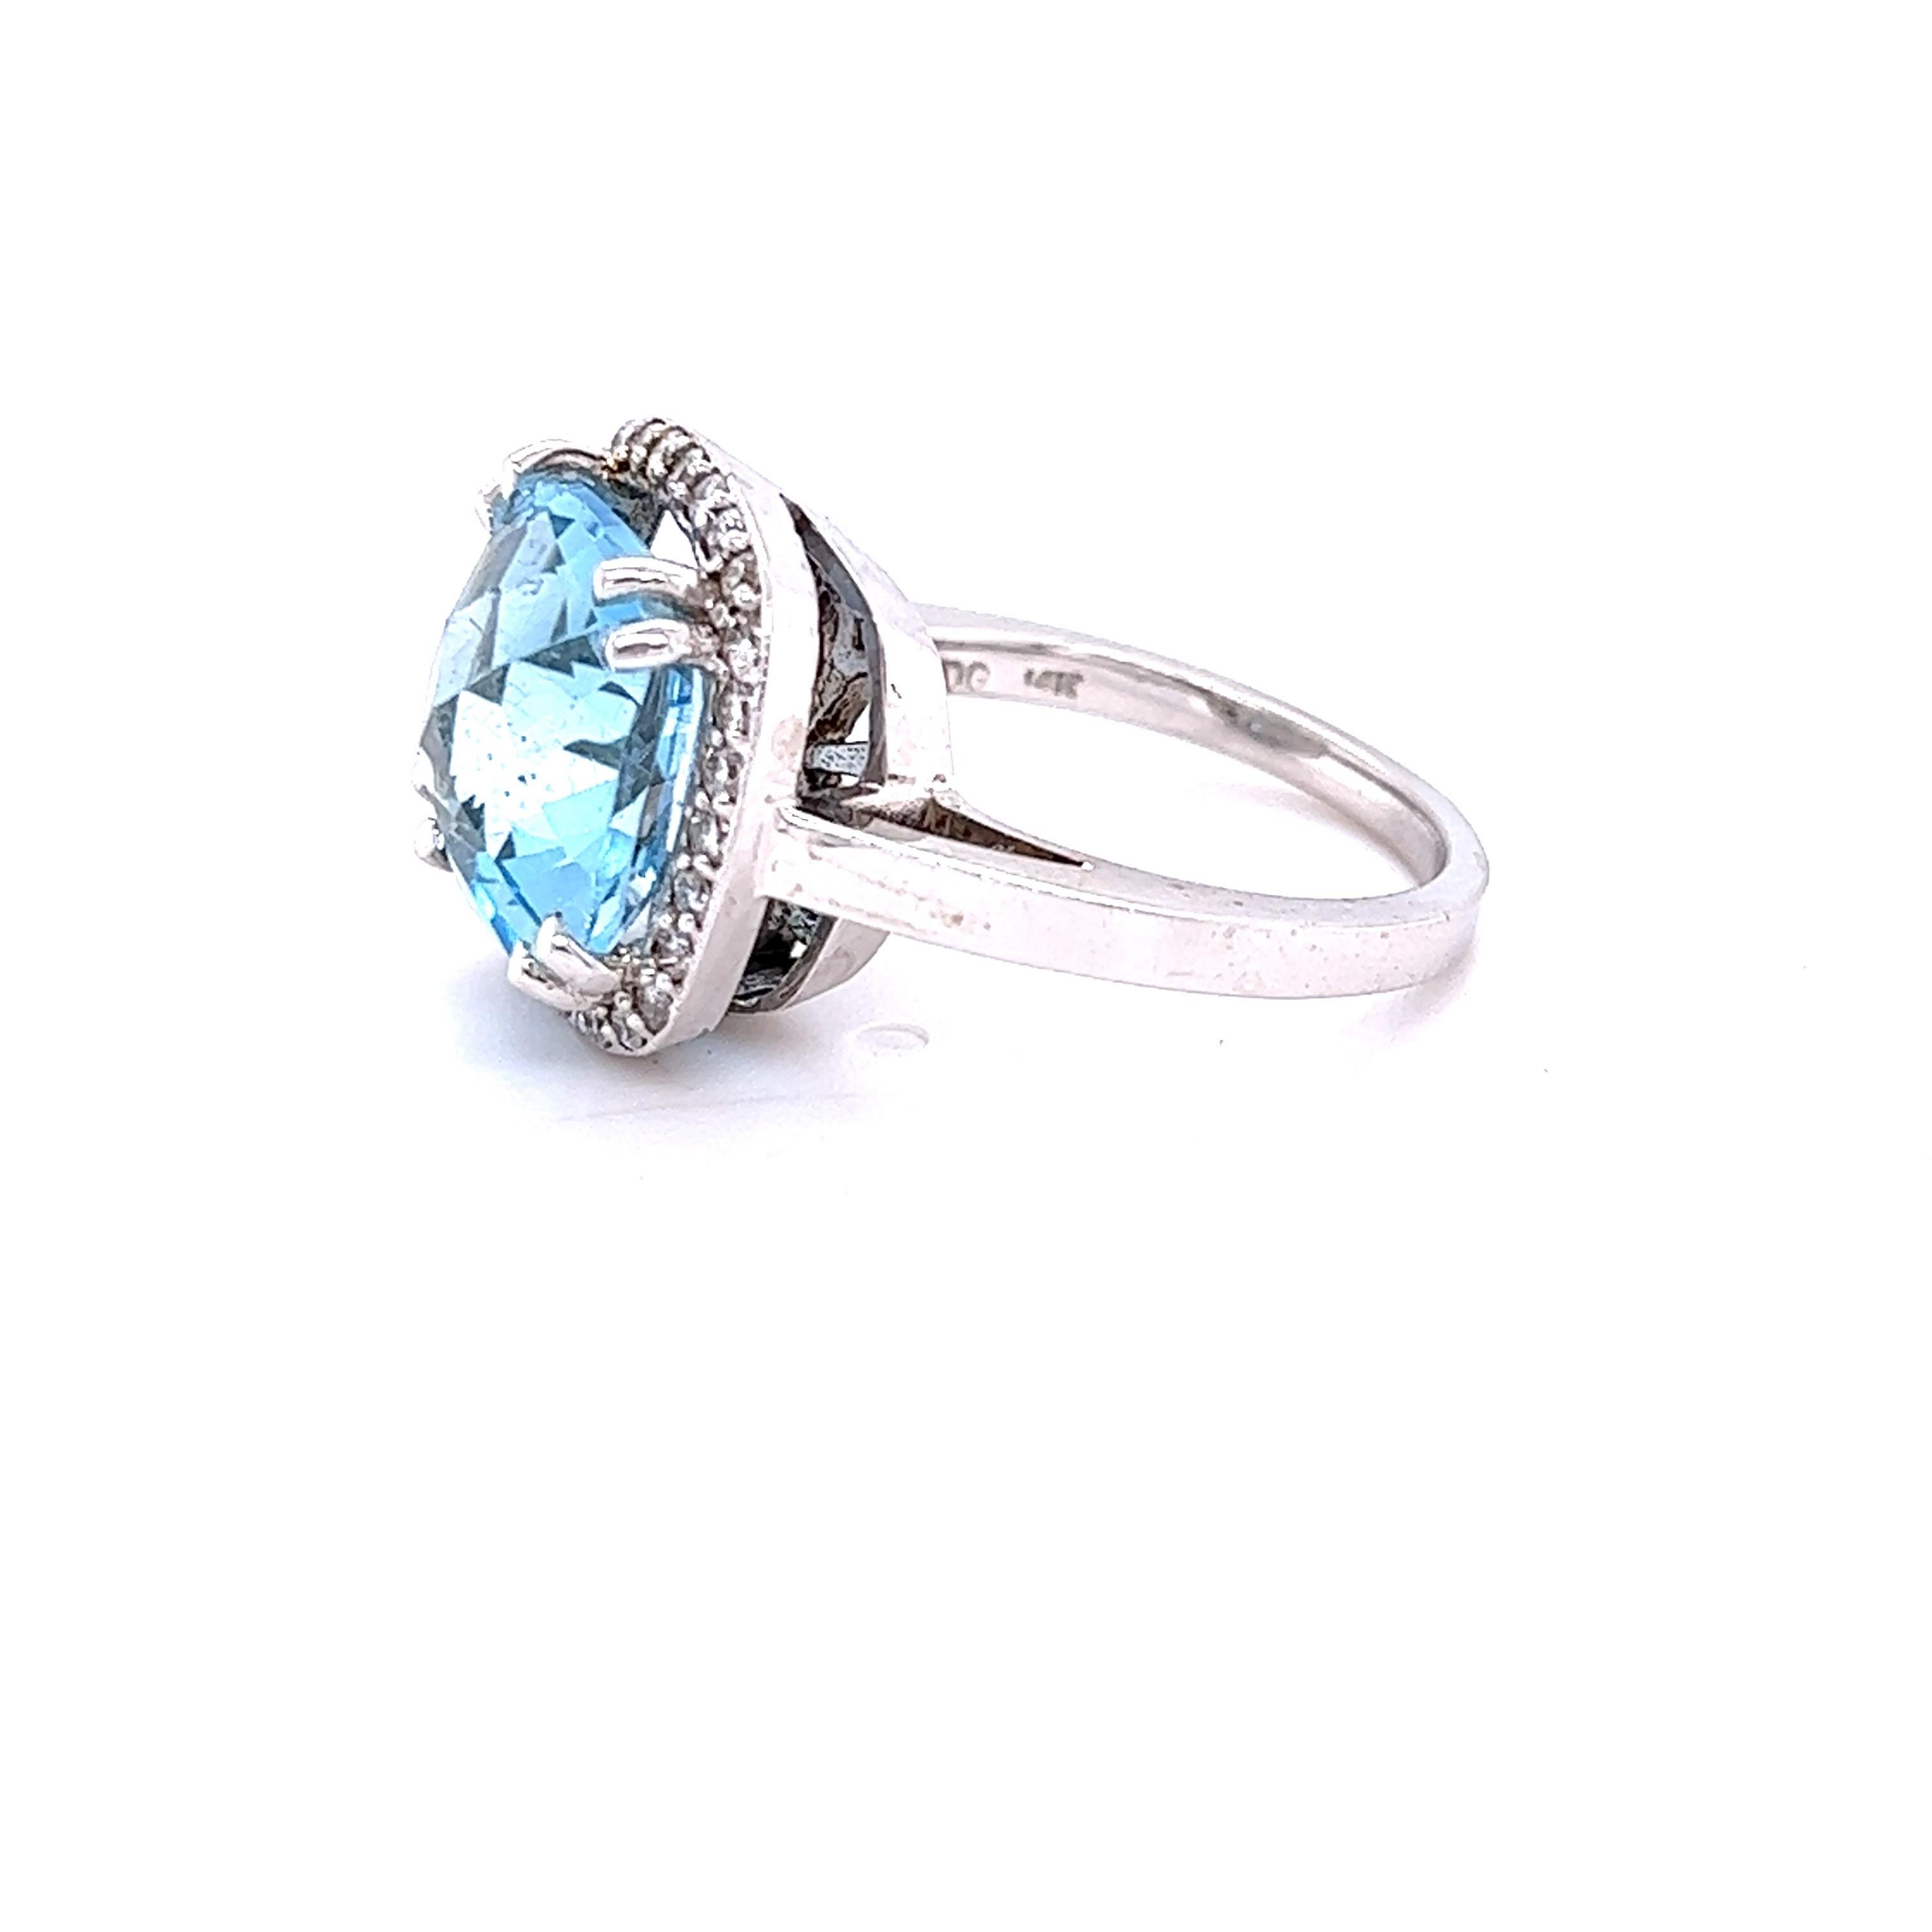 This statement ring has a Cushion Cut Blue Topaz that weighs 8.94 Carats. 
It is surrounded by a simple halo of 28 Round Cut Diamonds that weighs 0.39 Carats. The clarity and color of the diamonds are SI-F. 

It is crafted in 14 Karat White Gold and